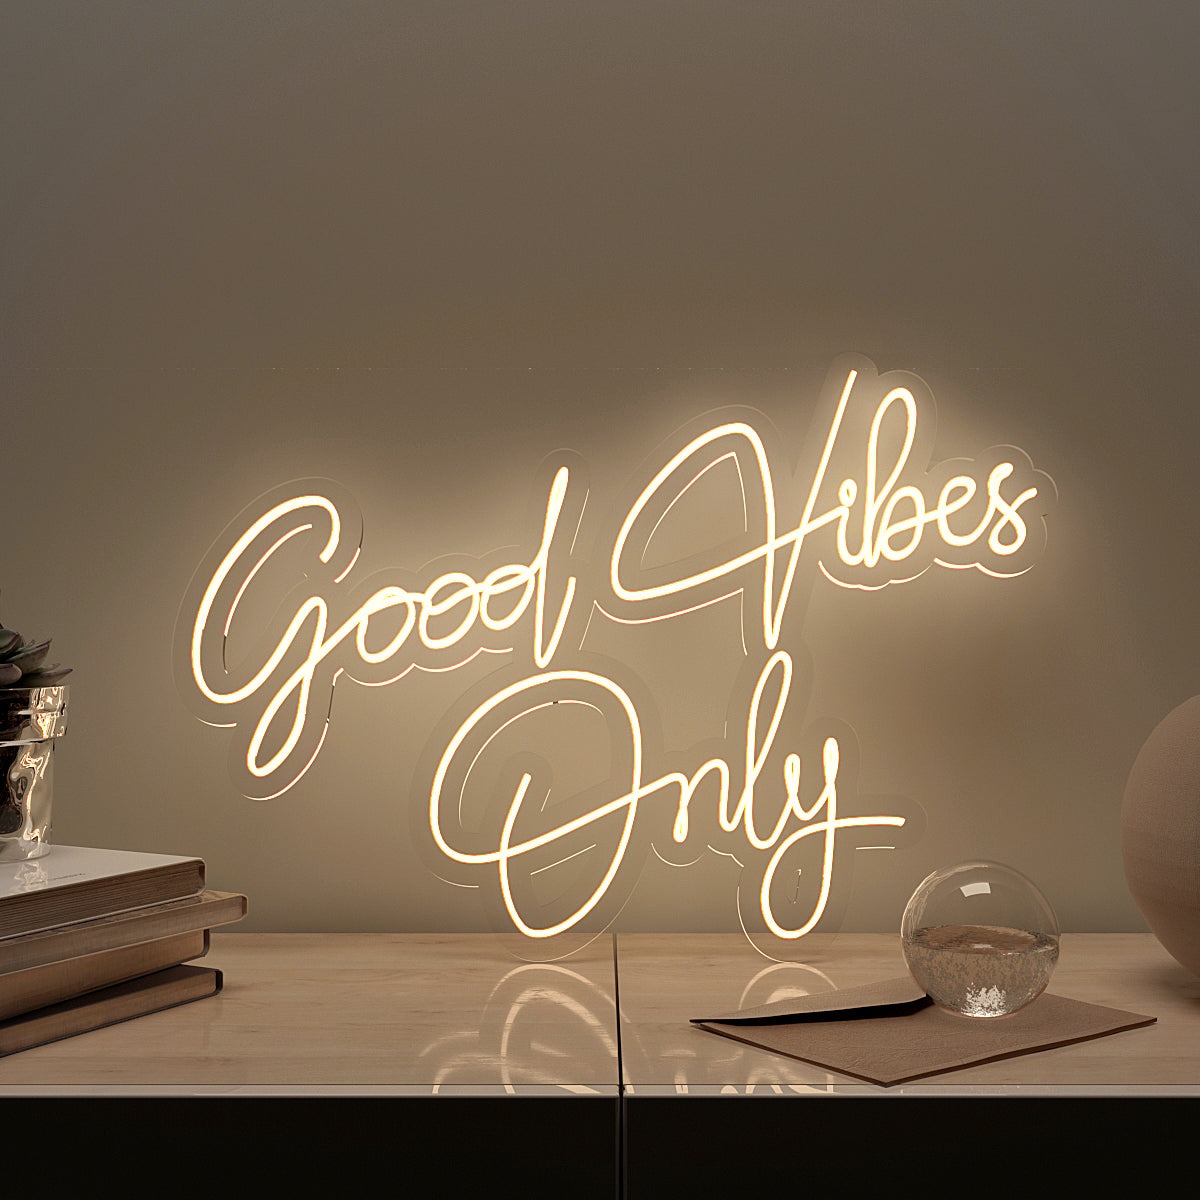 “Good Vibes Only” neon sign to emit positive energy